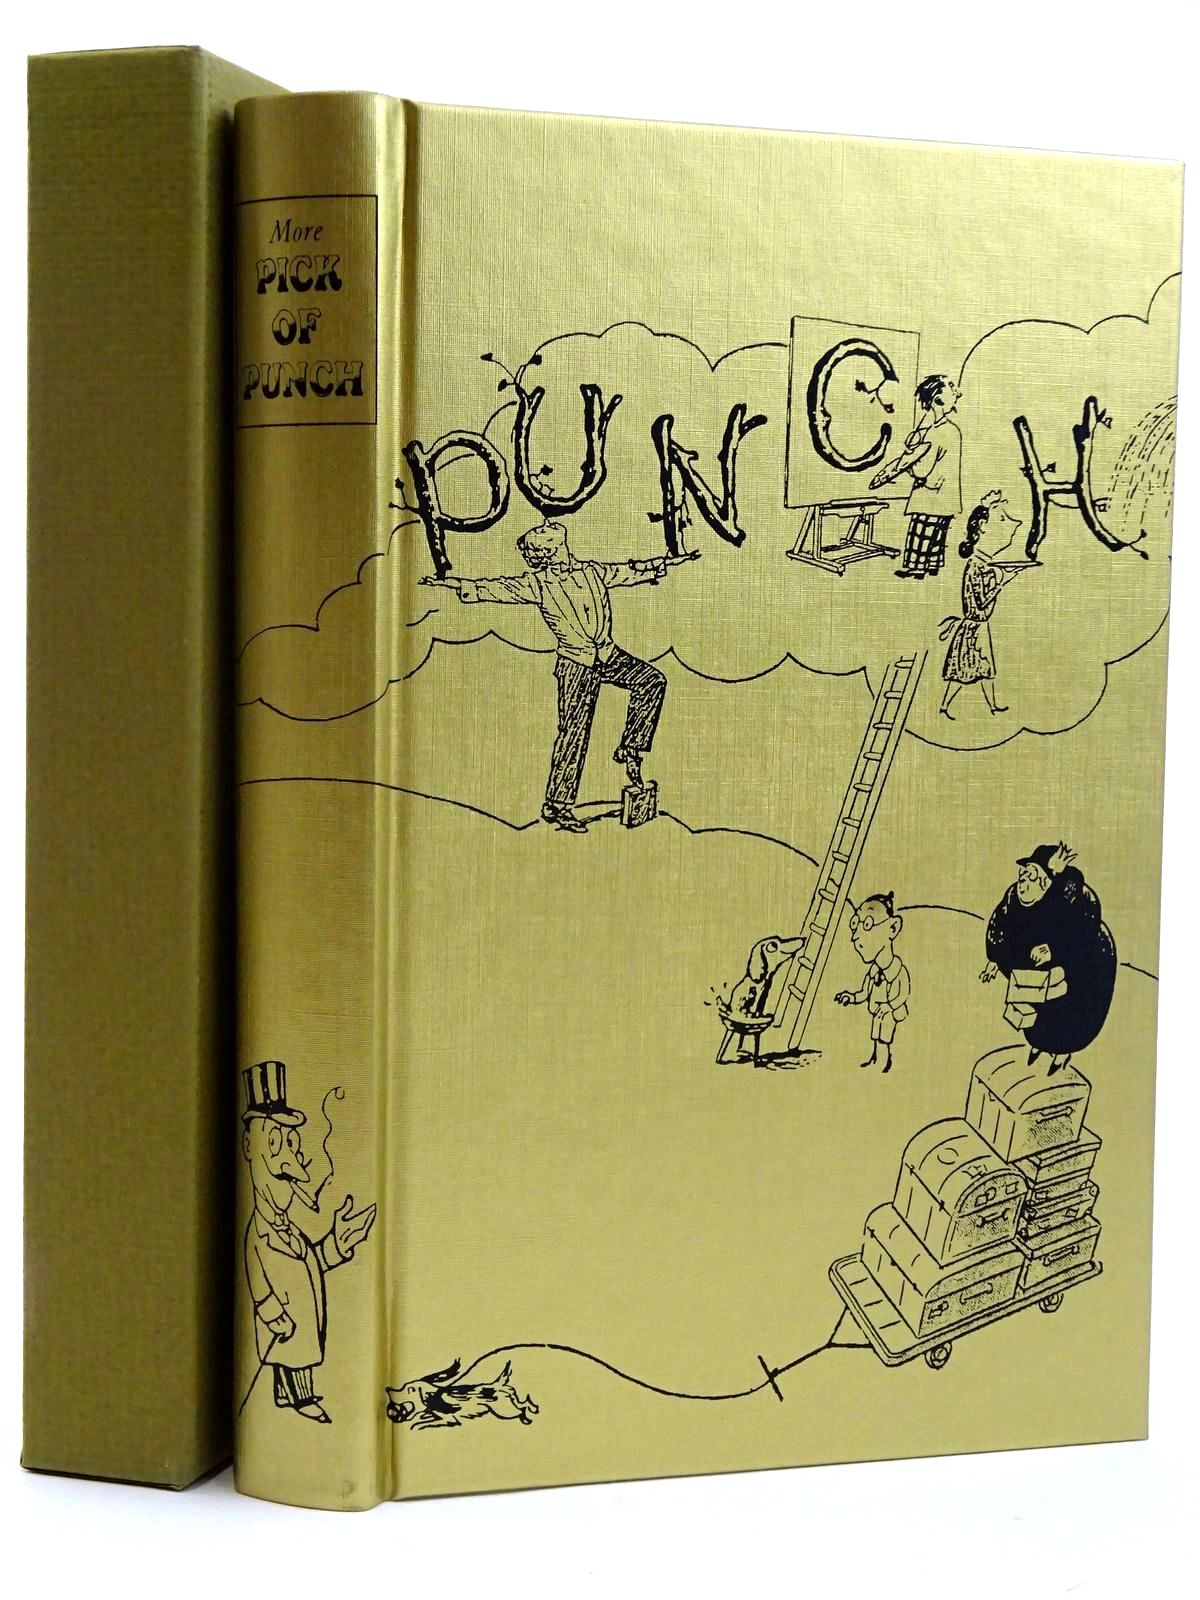 Photo of MORE PICK OF PUNCH written by Doran, Amanda-Jane published by Folio Society (STOCK CODE: 2131726)  for sale by Stella & Rose's Books